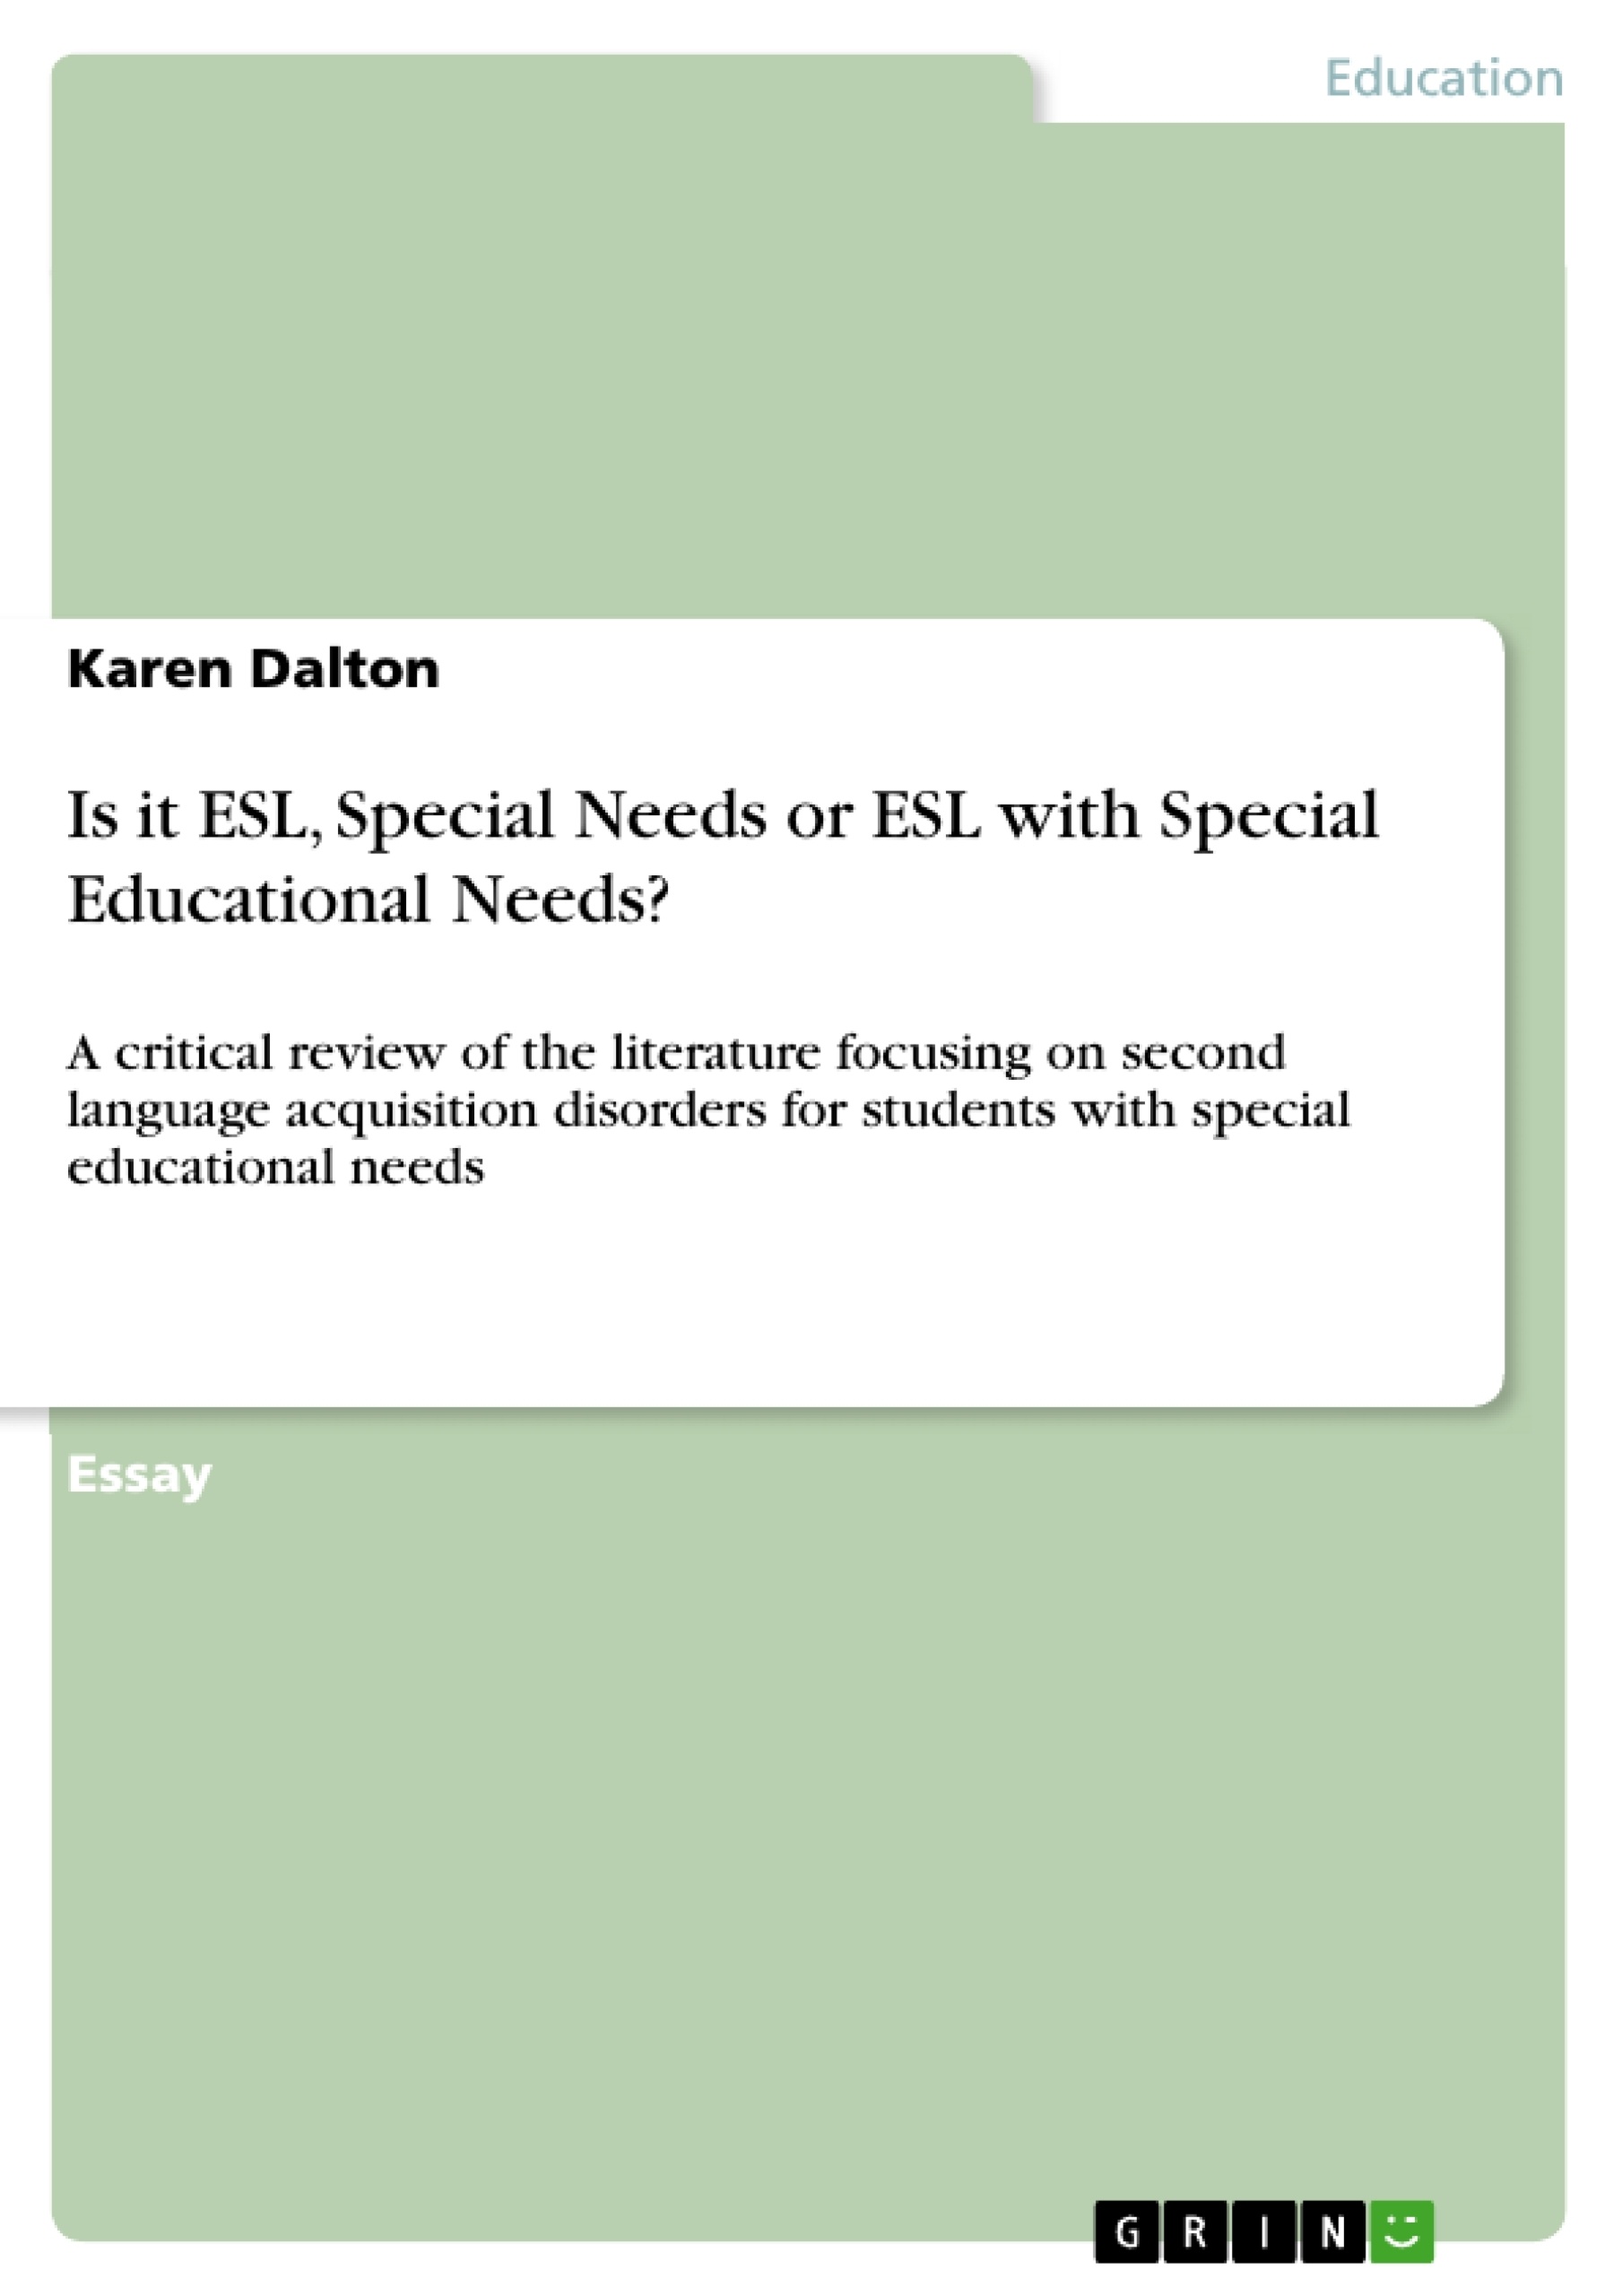 Title: Is it ESL, Special Needs or ESL with Special Educational Needs?